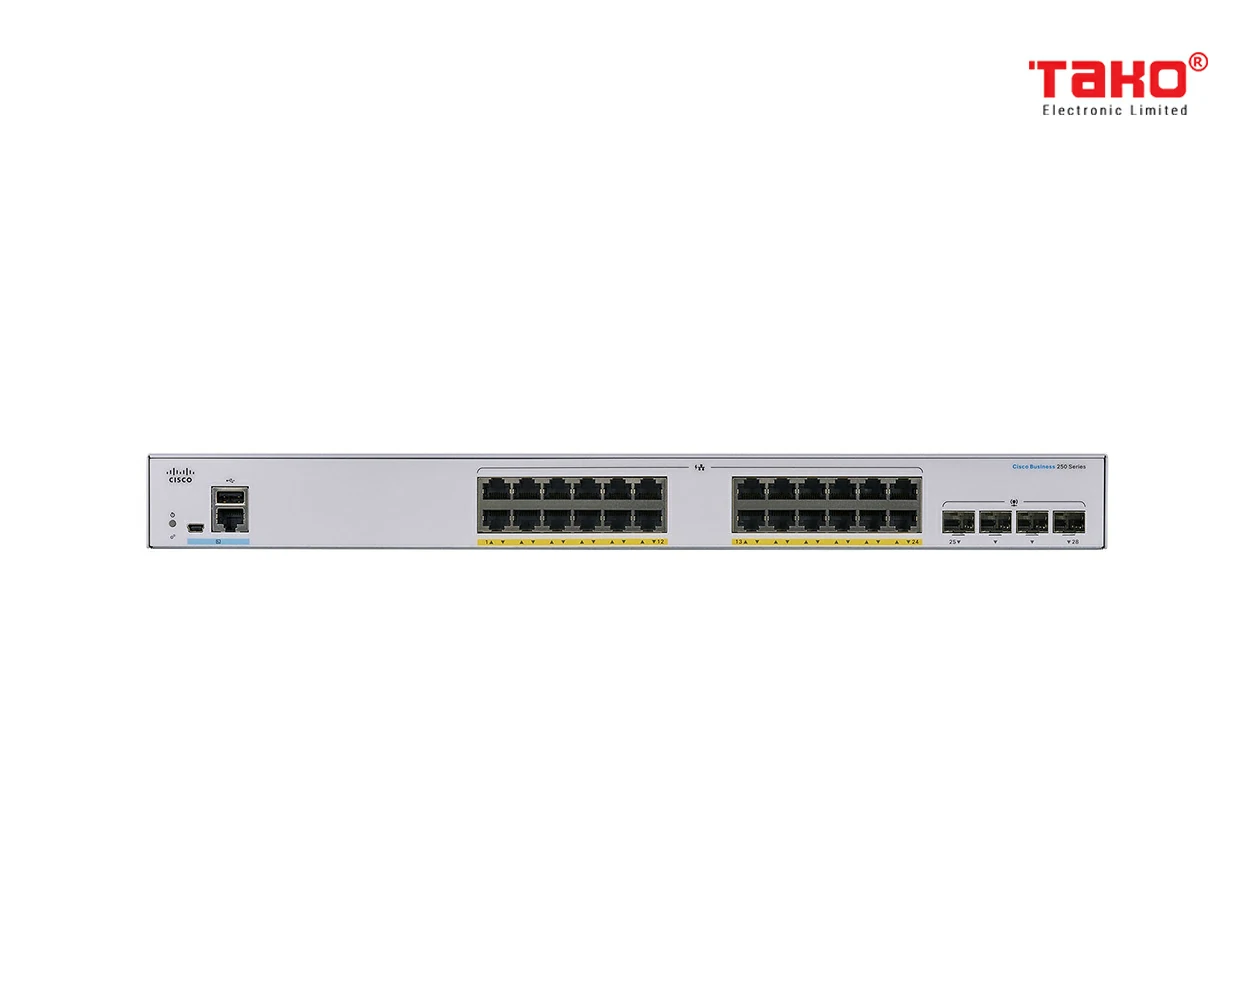 Cisco CBS350-24P-4X 24-port 10/100/1000 Mbps PoE Layer 3 manageable web switch 4 x 10 Gbps SFP slots 3